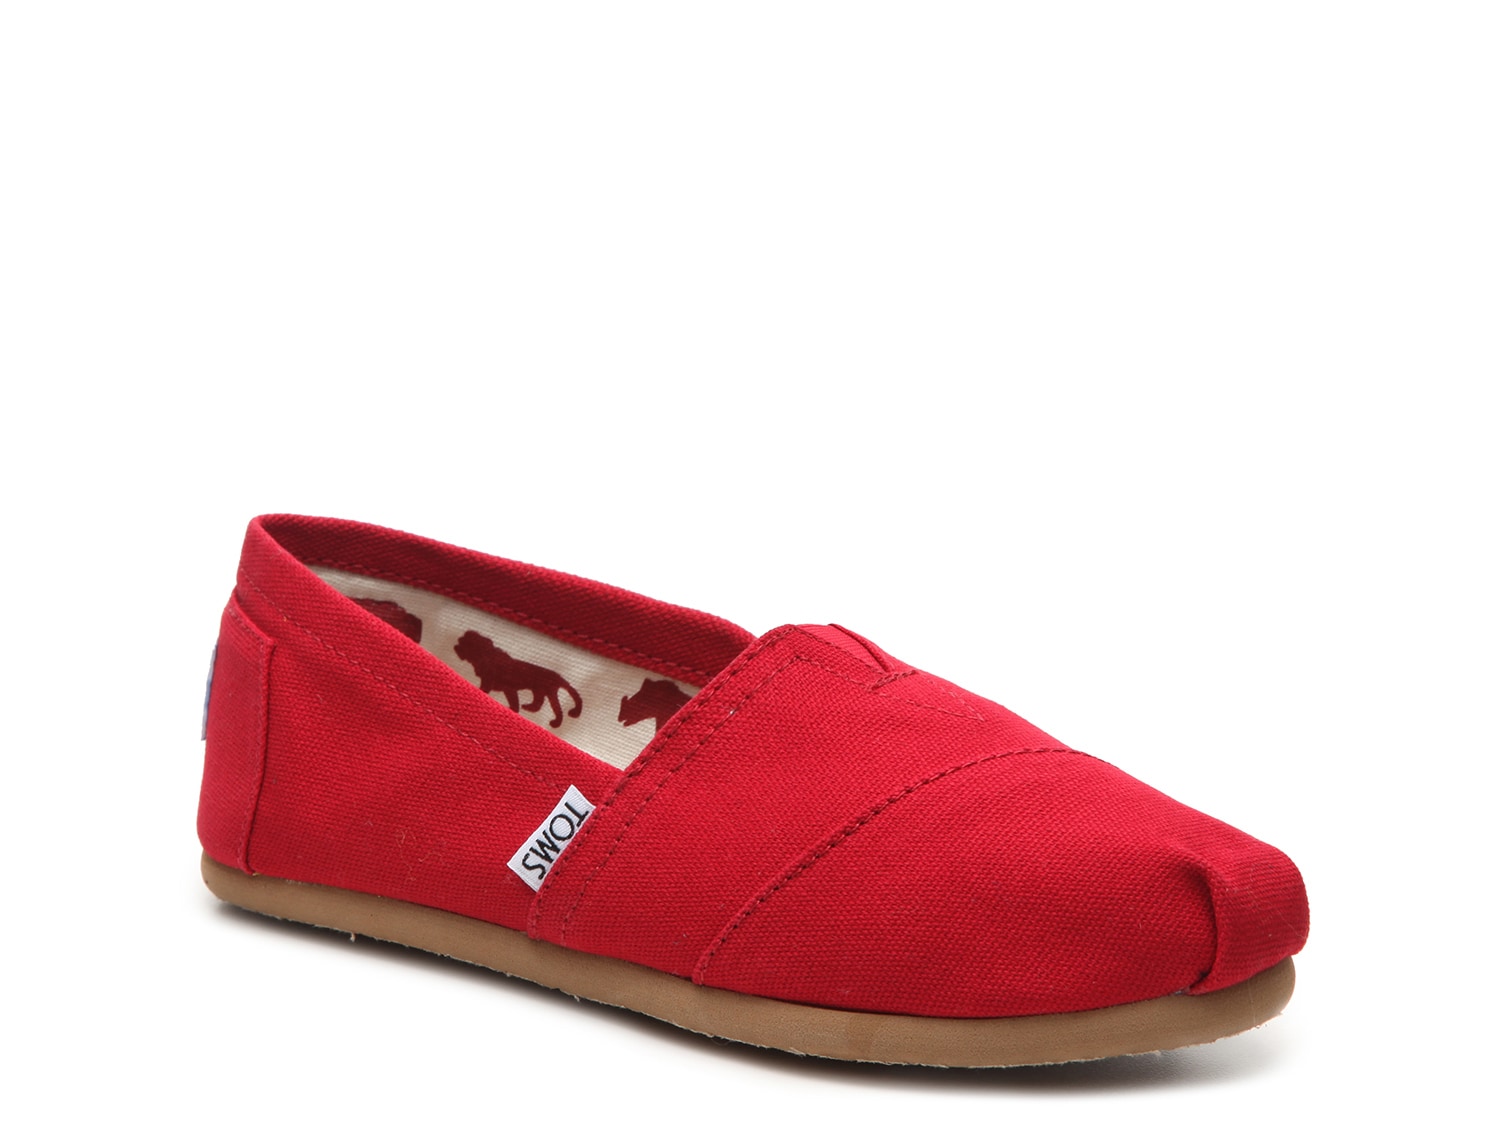 toms shoes sold near me